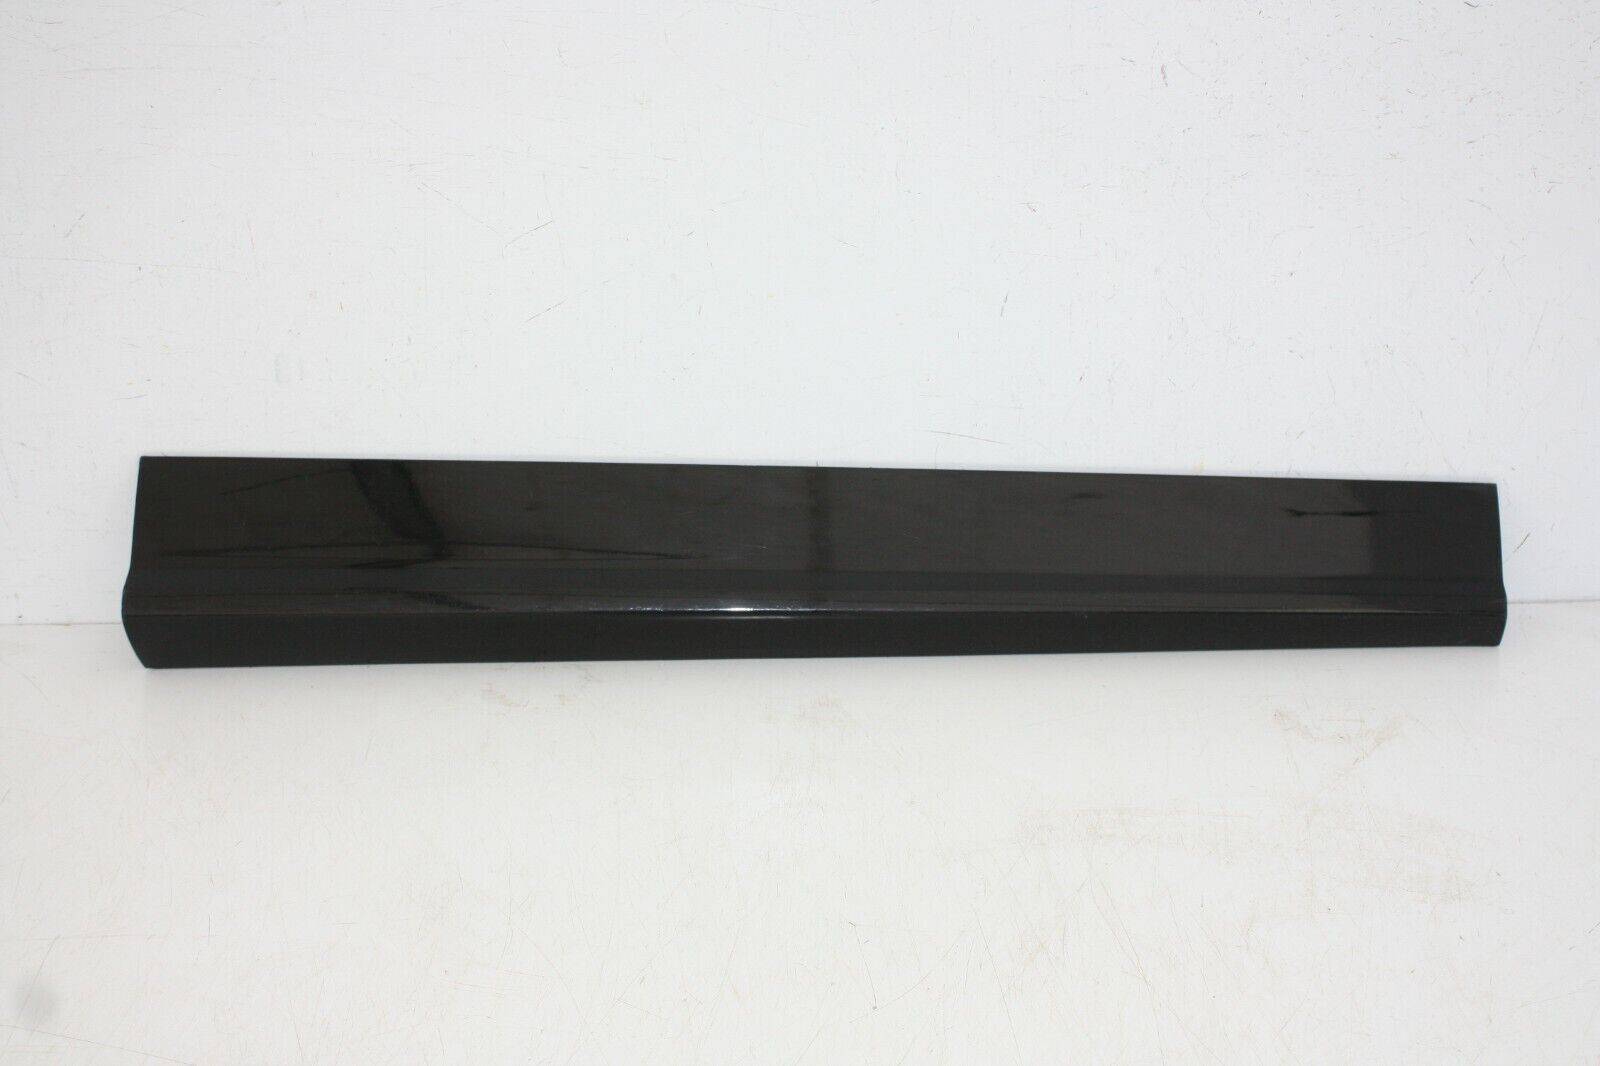 Audi-Q5-S-Line-Front-Right-Door-Moulding-2017-TO-2020-80A853960B-Genuine-175367544189